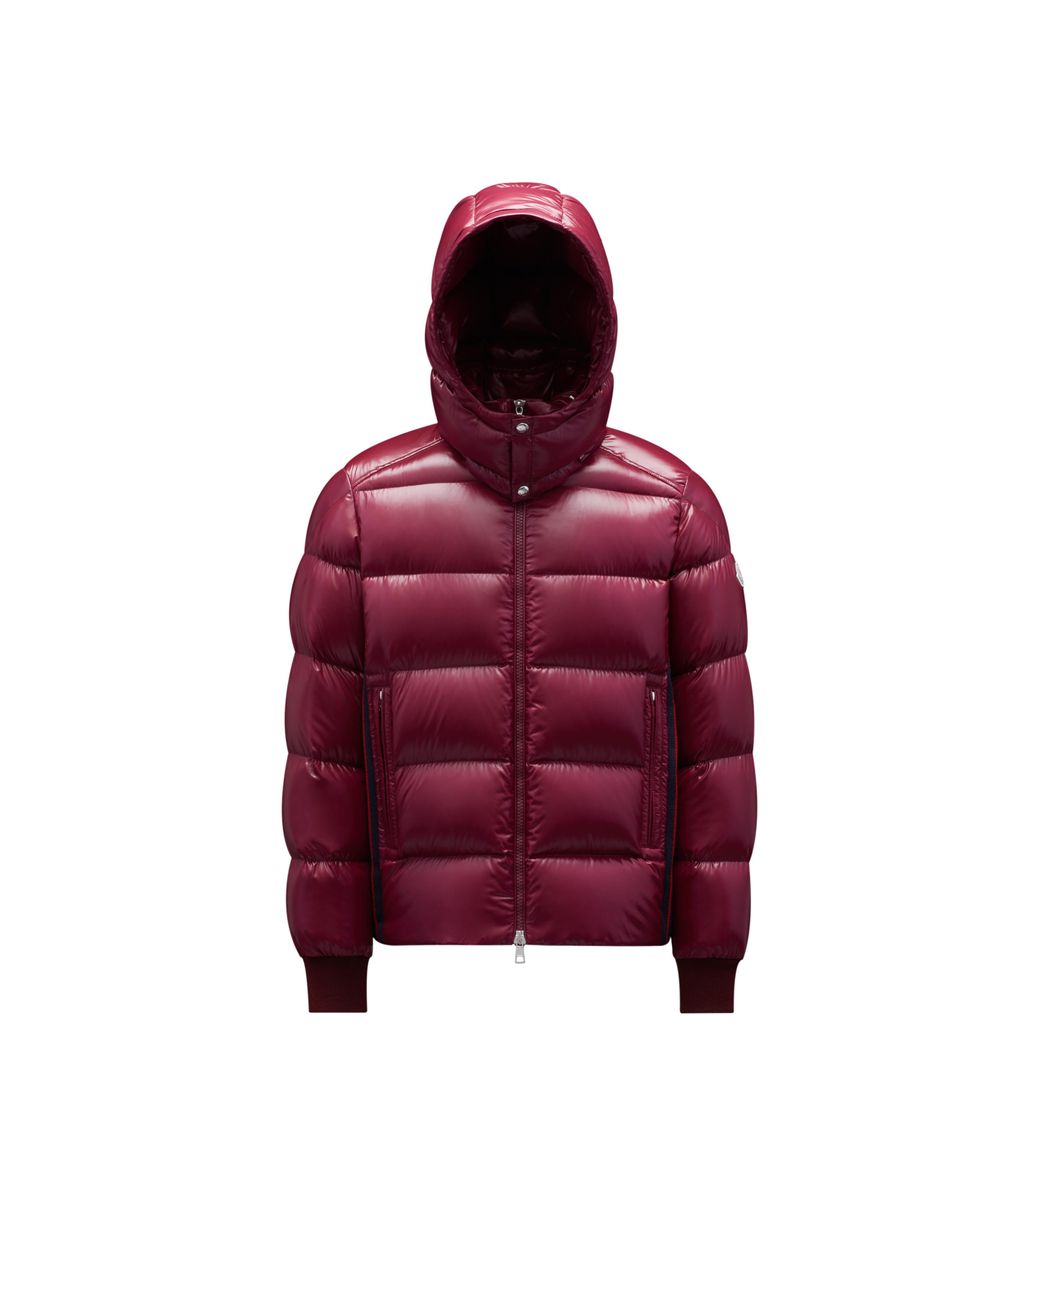 Moncler Lunetiere Short Down Jacket in Red for Men | Lyst